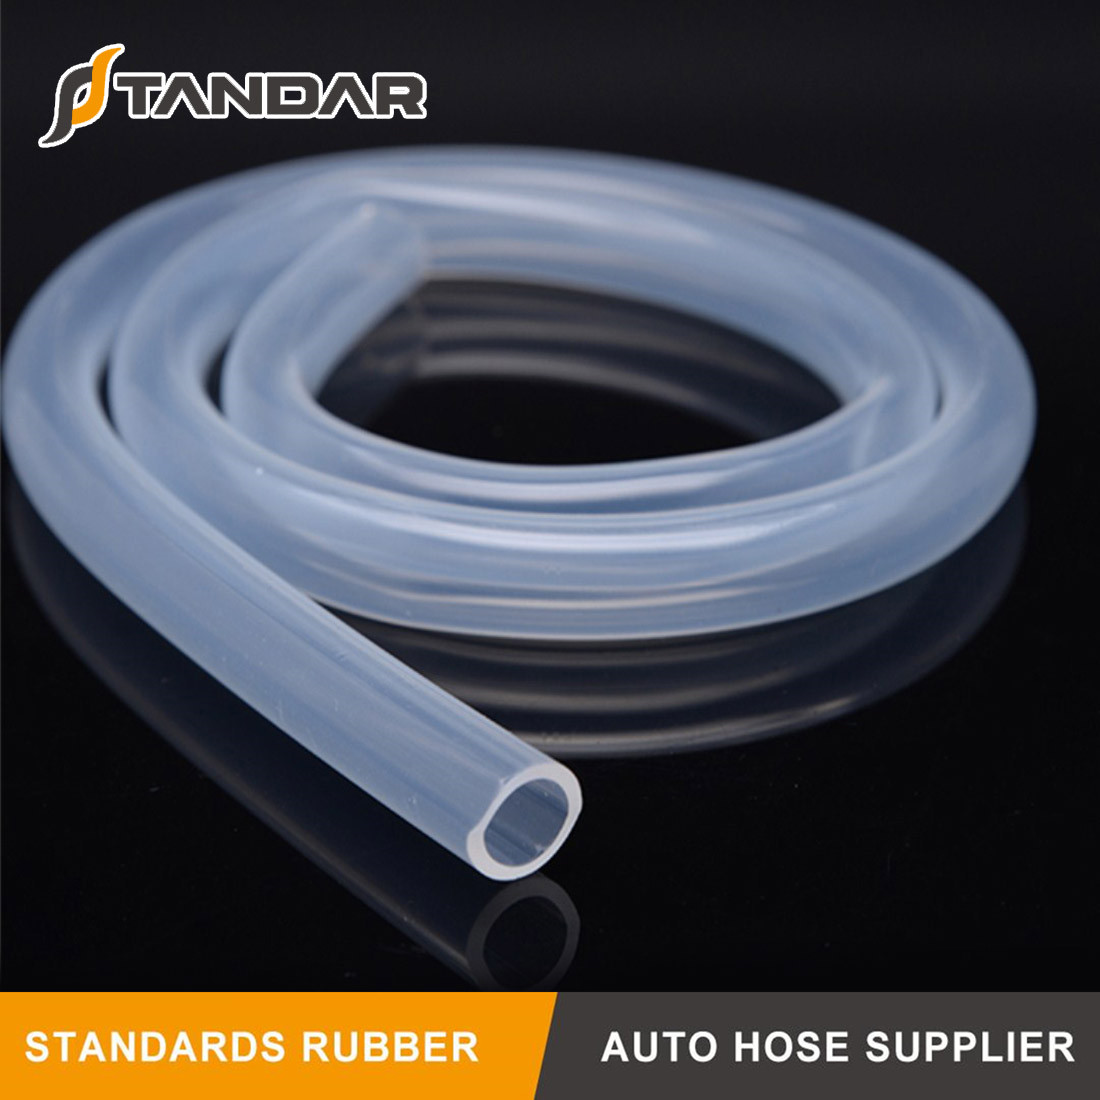 What are the technical requirements for peristaltic pump silicone hose?